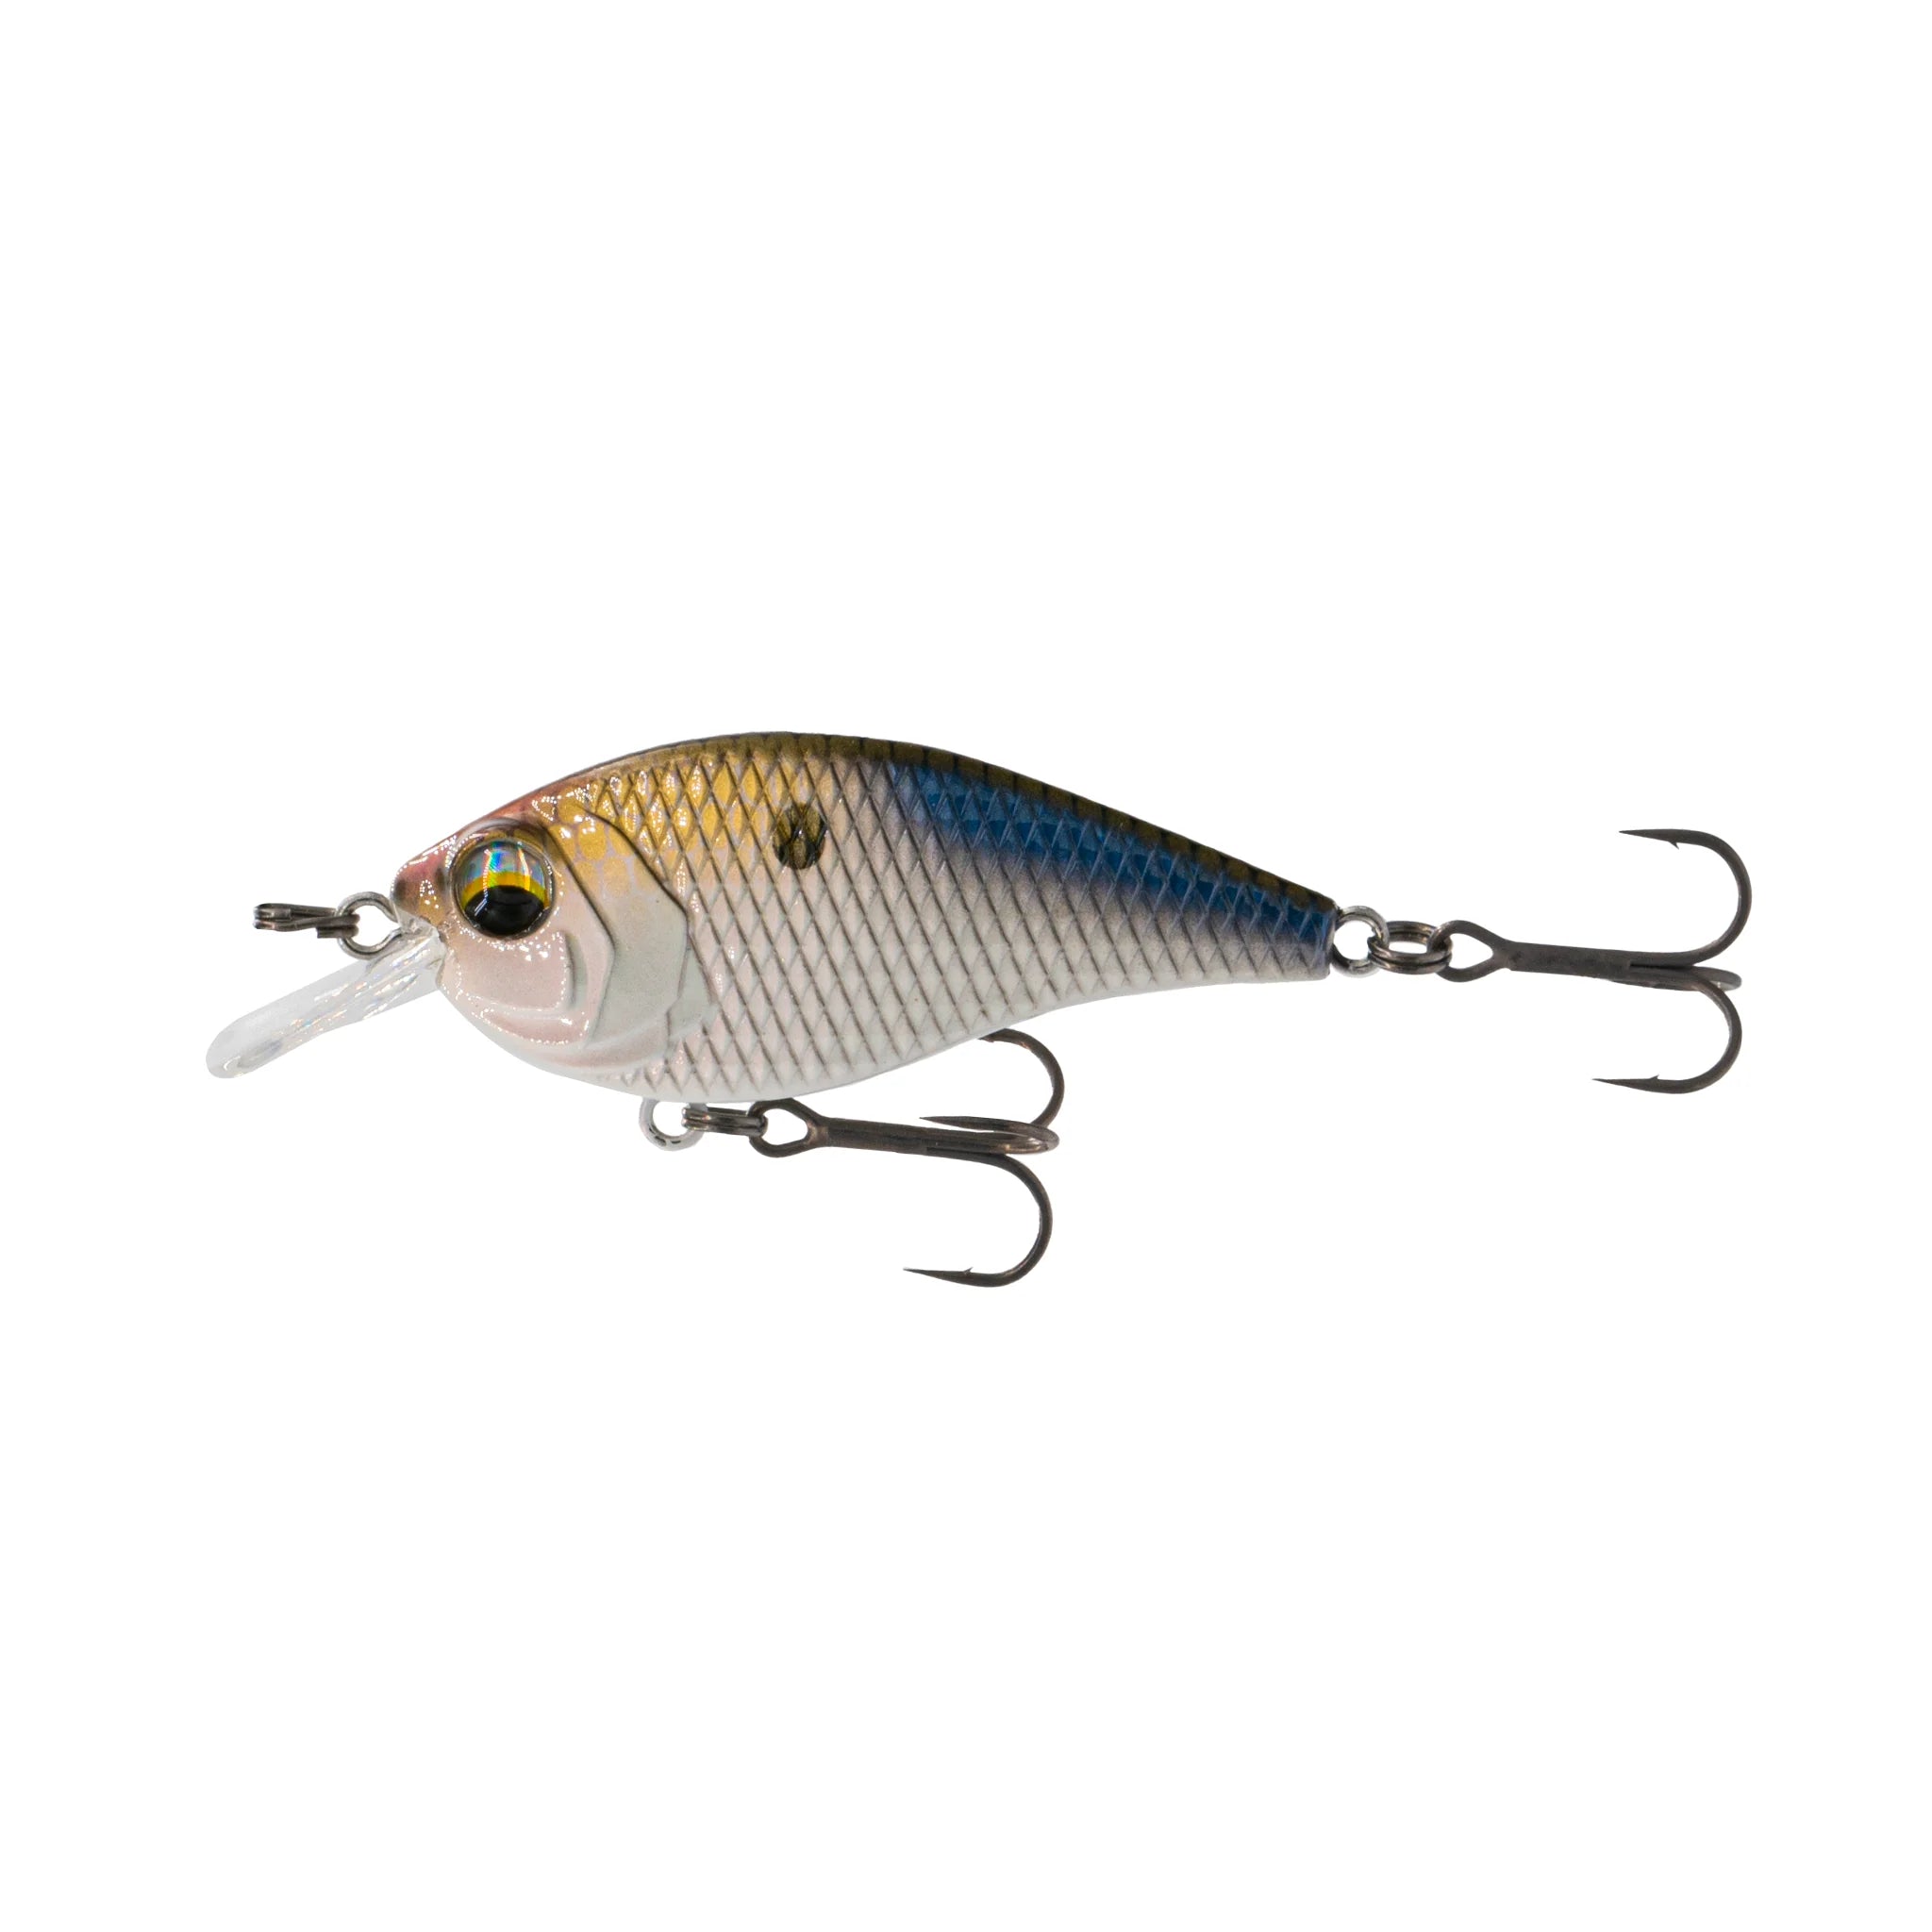 3 Crankbait Bait Ball – Tackling The Water